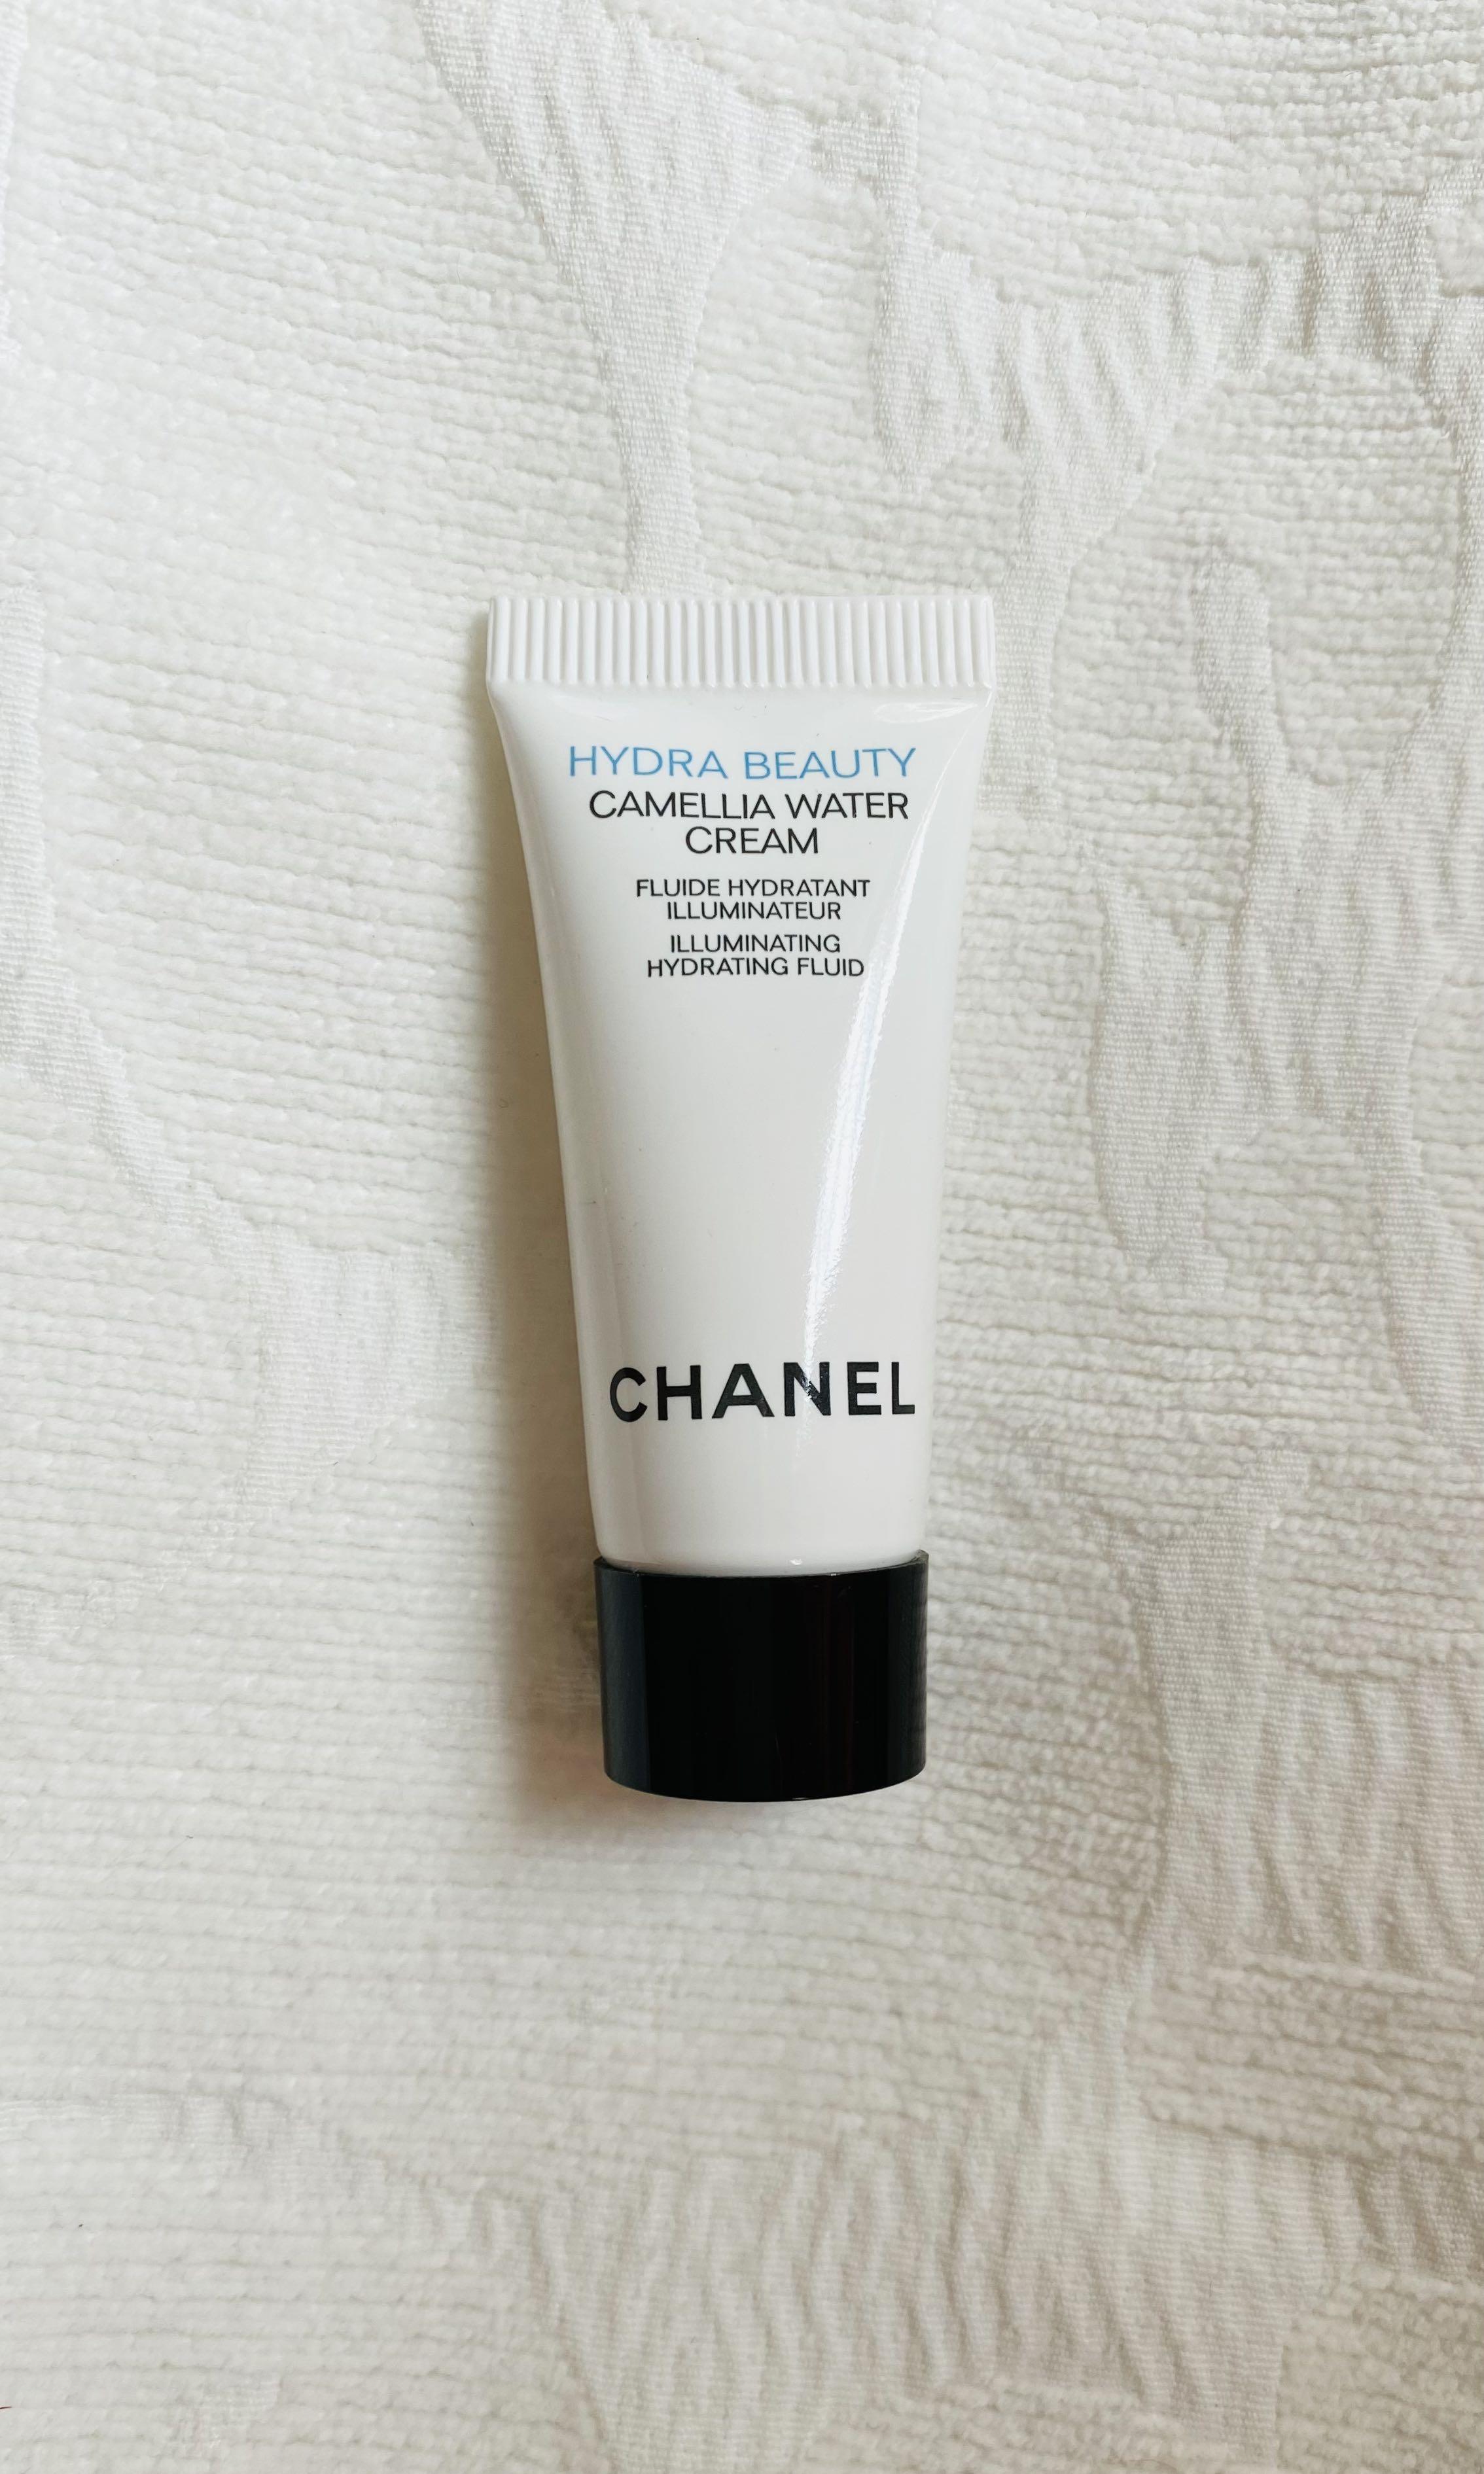 CHANEL HYDRA BEAUTY SKINCARE REVIEW Micro Essence and Camellia Water Cream